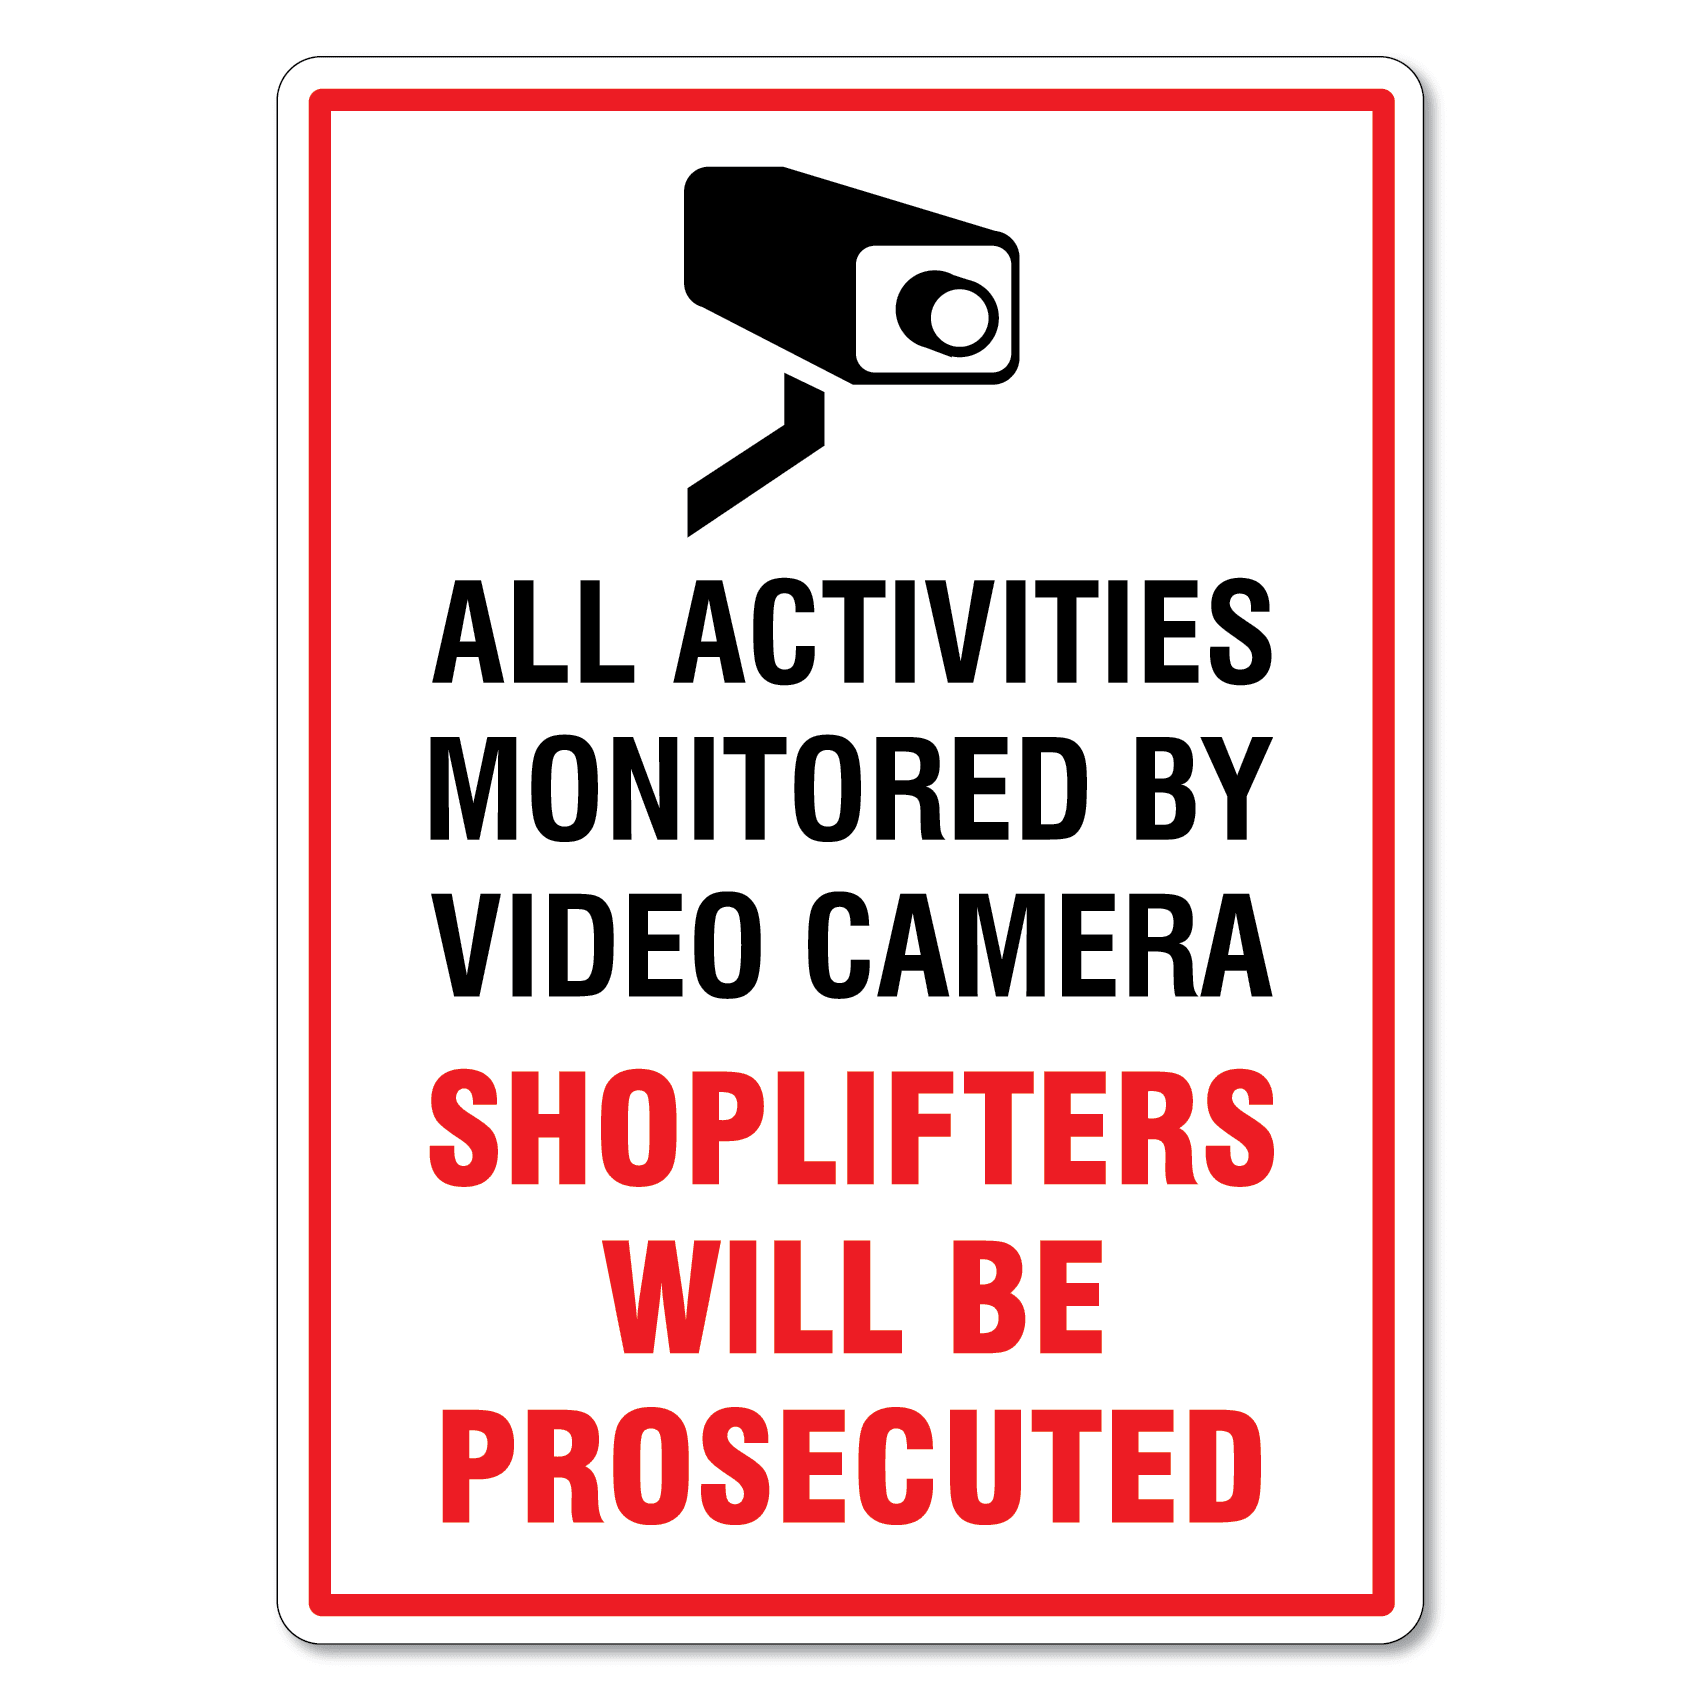 CCTV in operation in this store shoplifters will be prosecuted Safety sign 